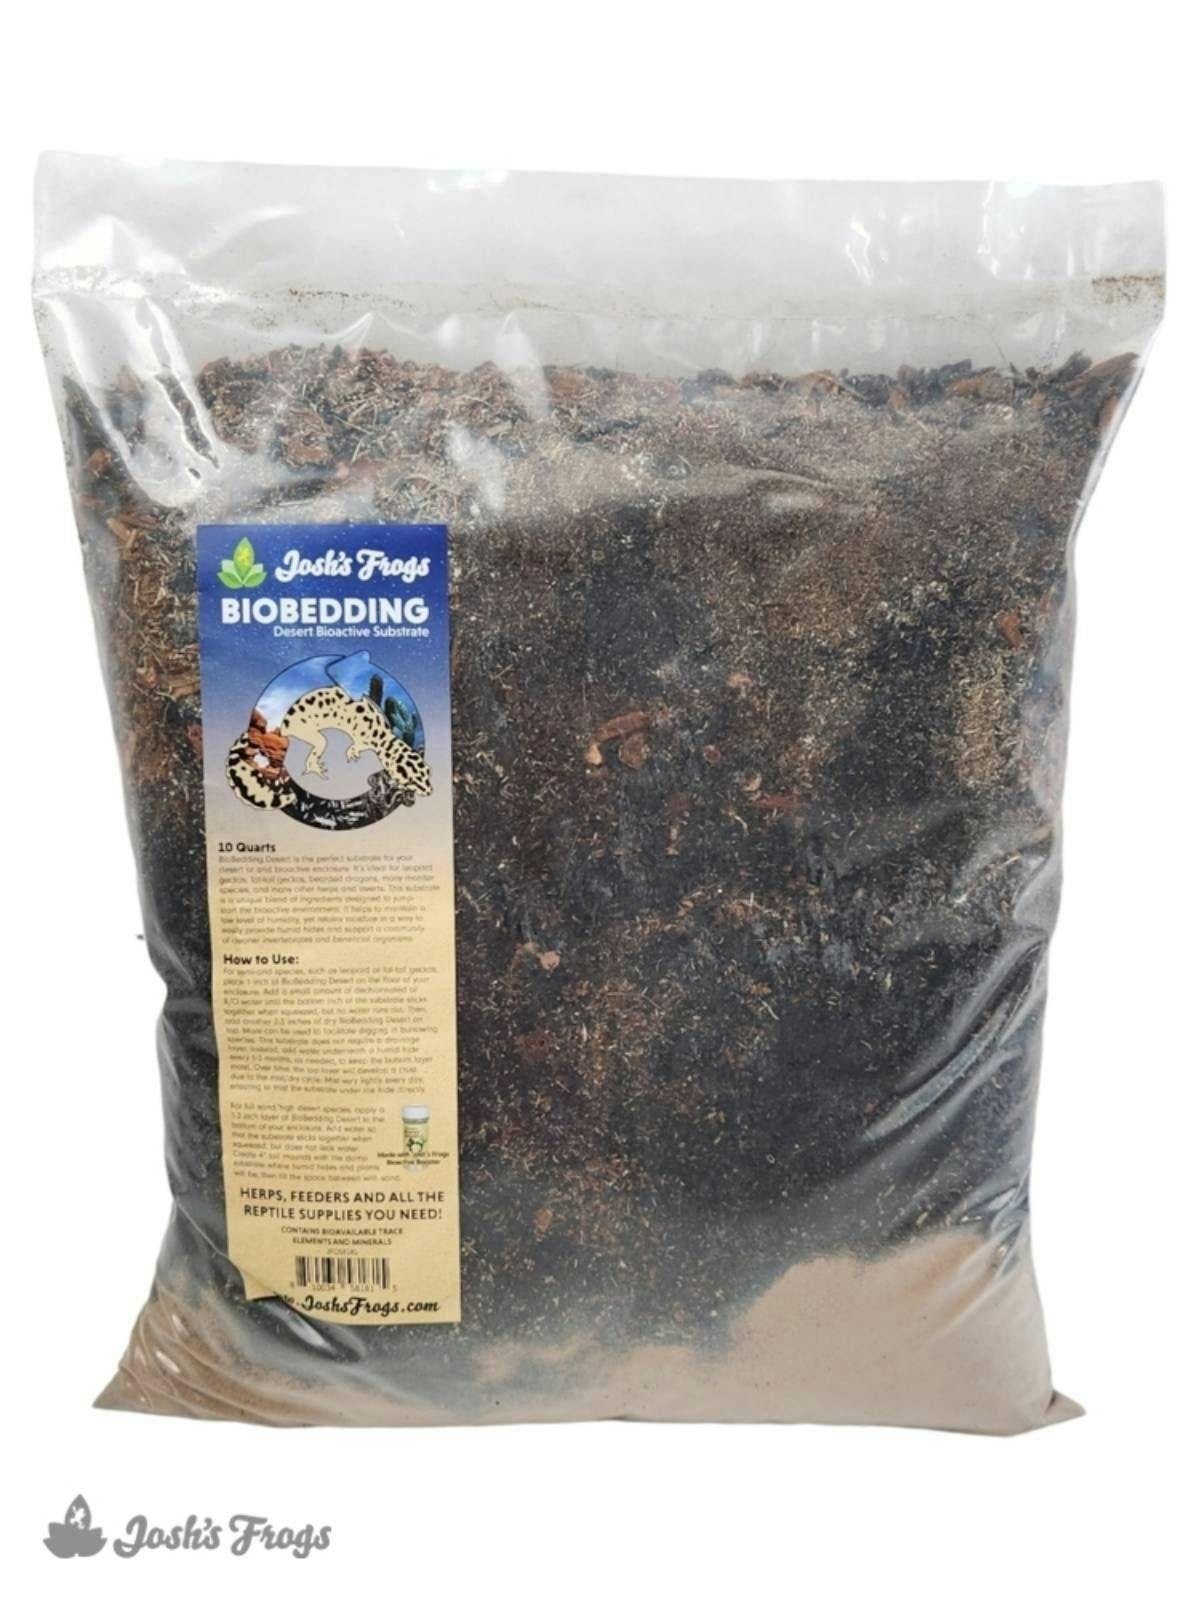 Image 1 for Josh's Frogs BioBedding Desert Bioactive Substrate (10 quarts) by Josh's Frogs